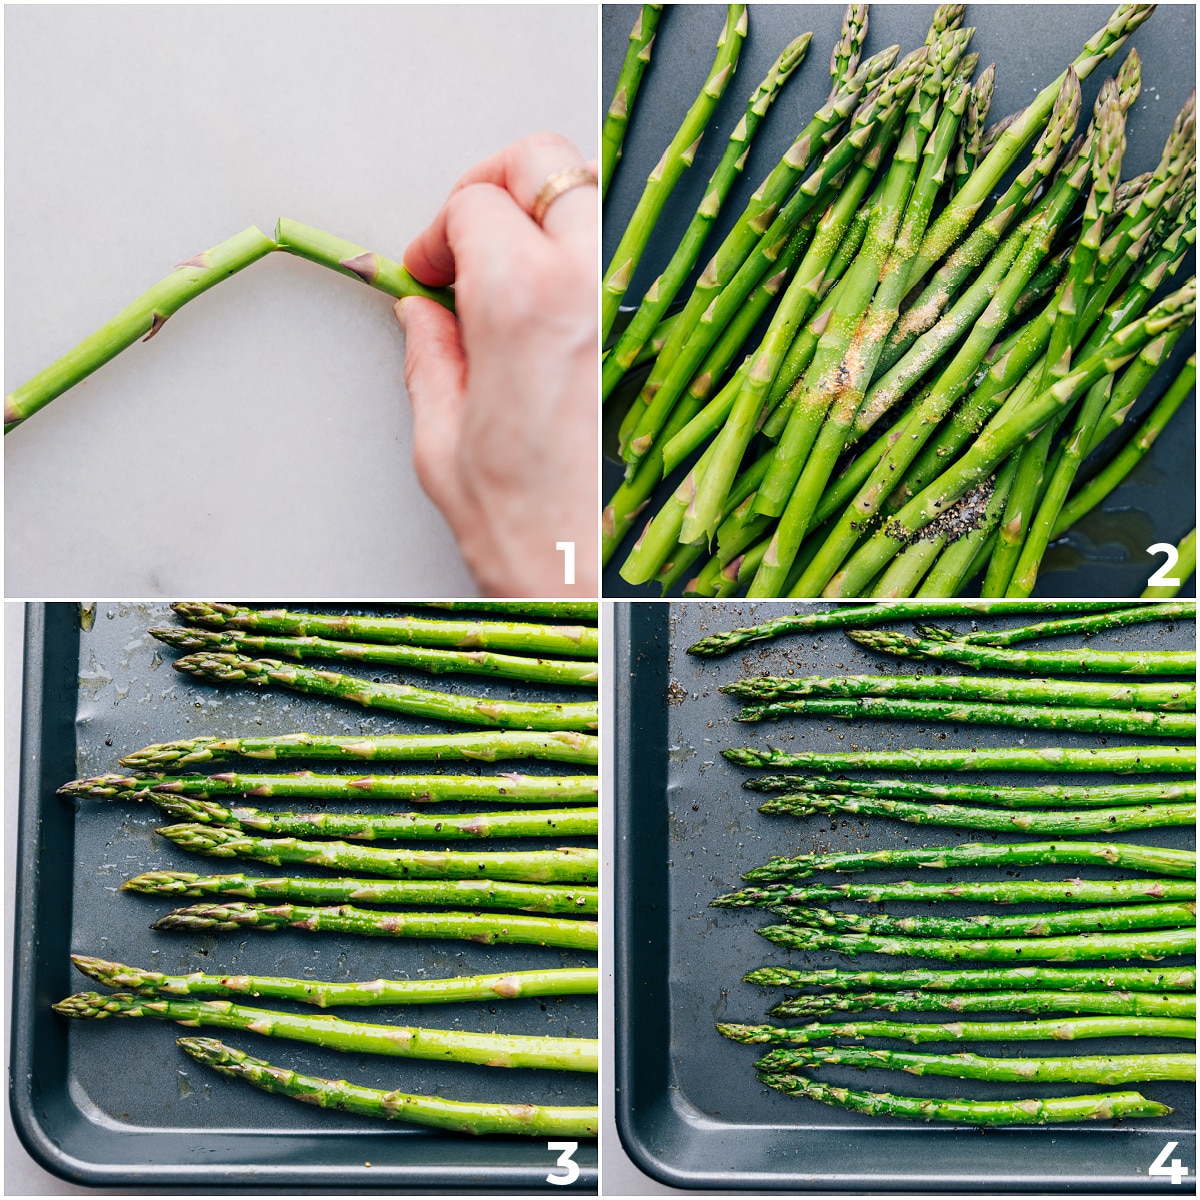 The asparagus being prepped and placed on the sheet pan along with seasonings to be roasted.